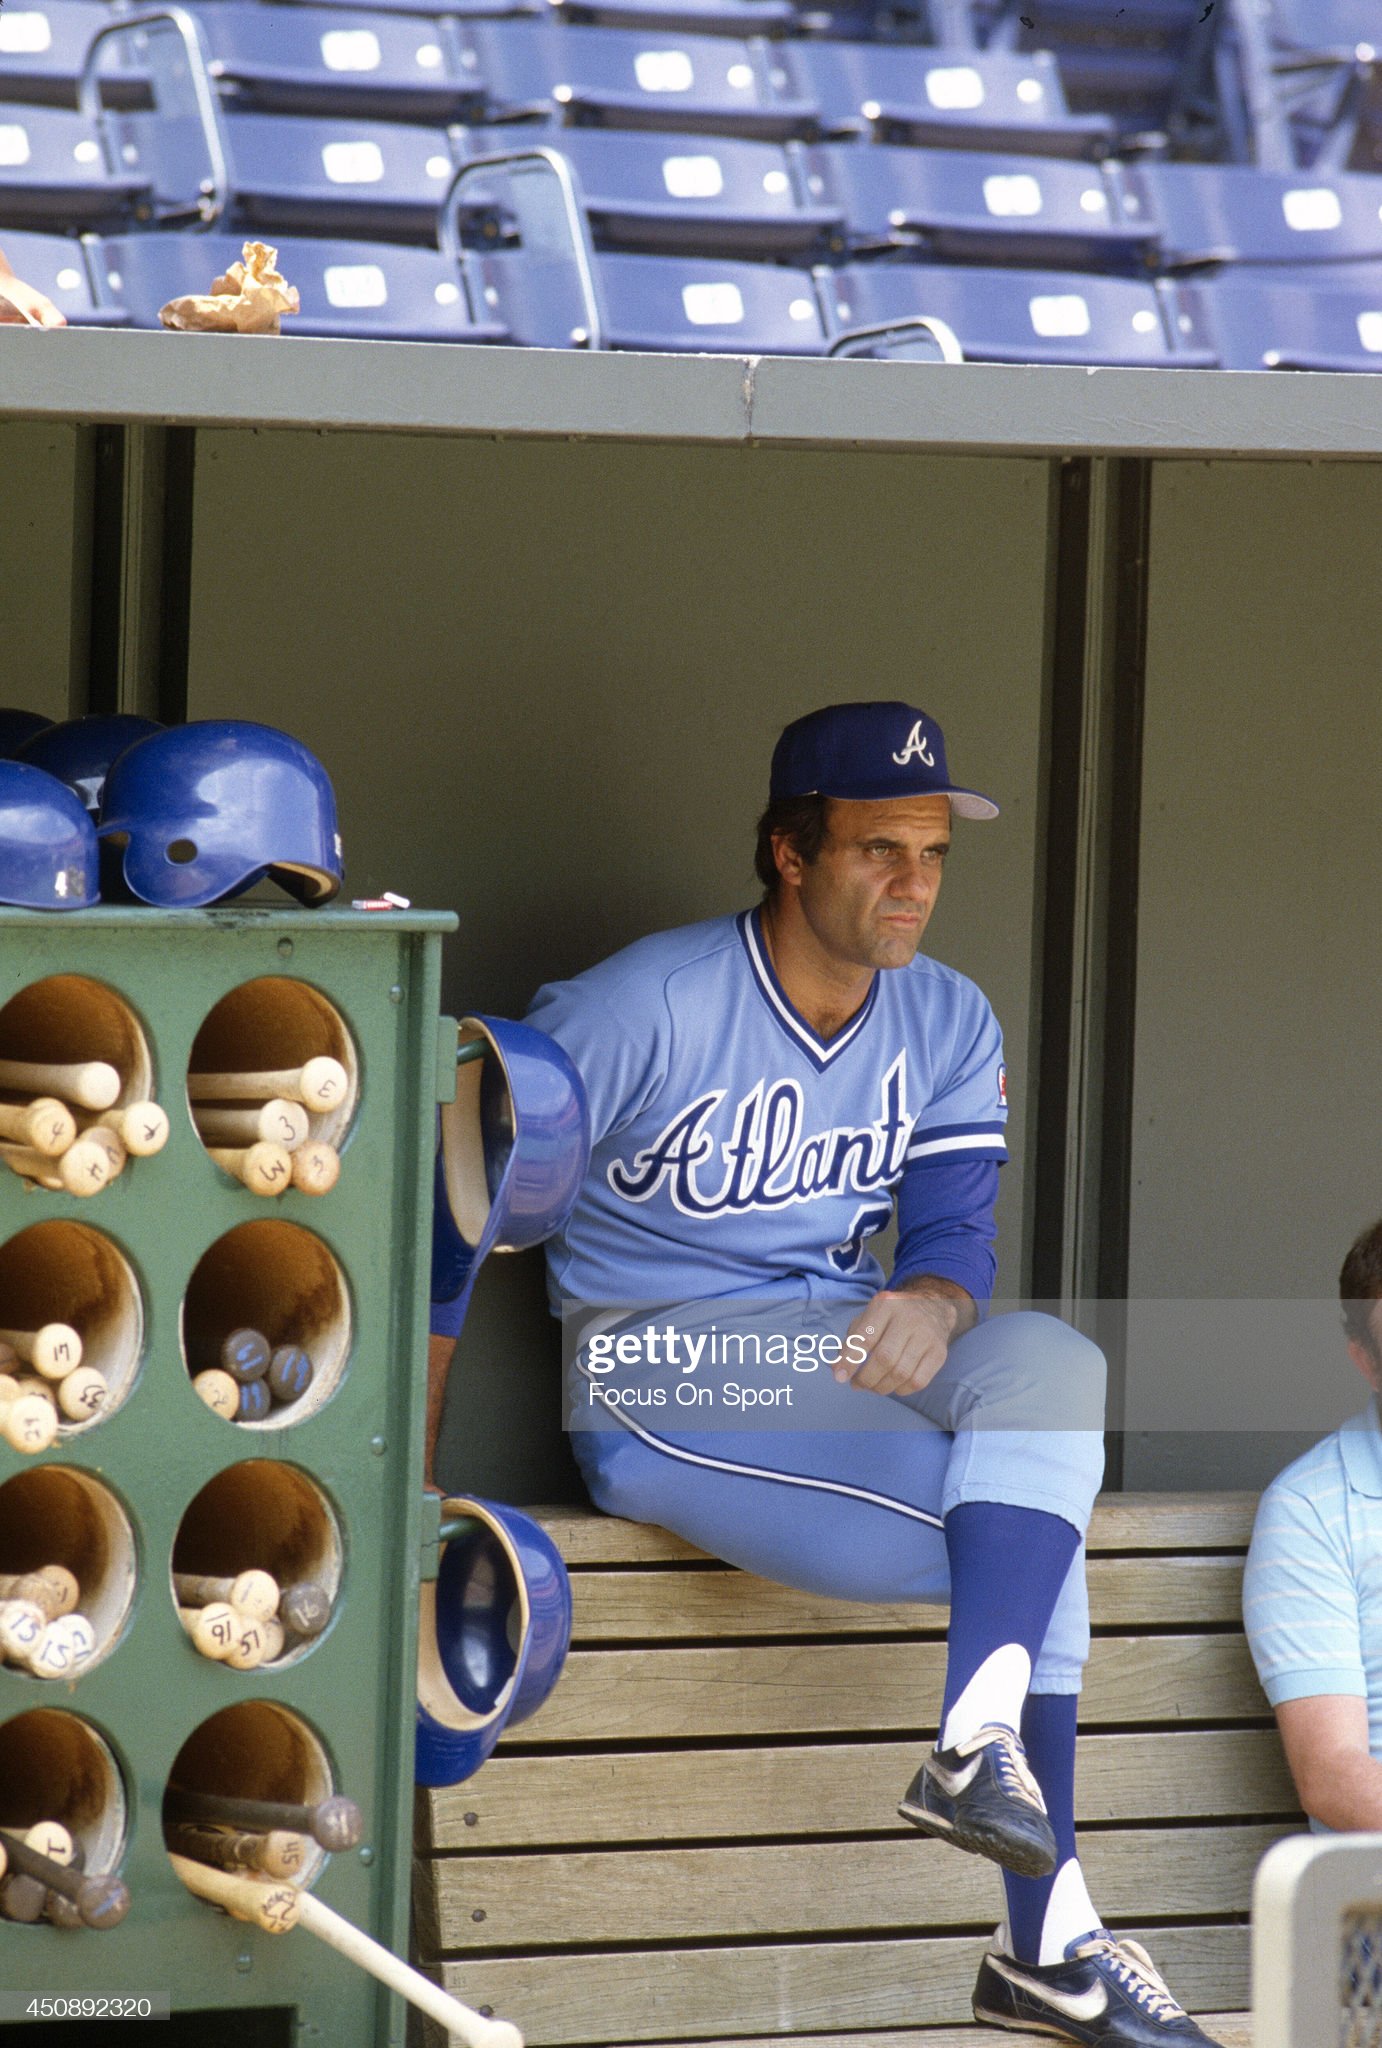 Joe Torre while Braves manager